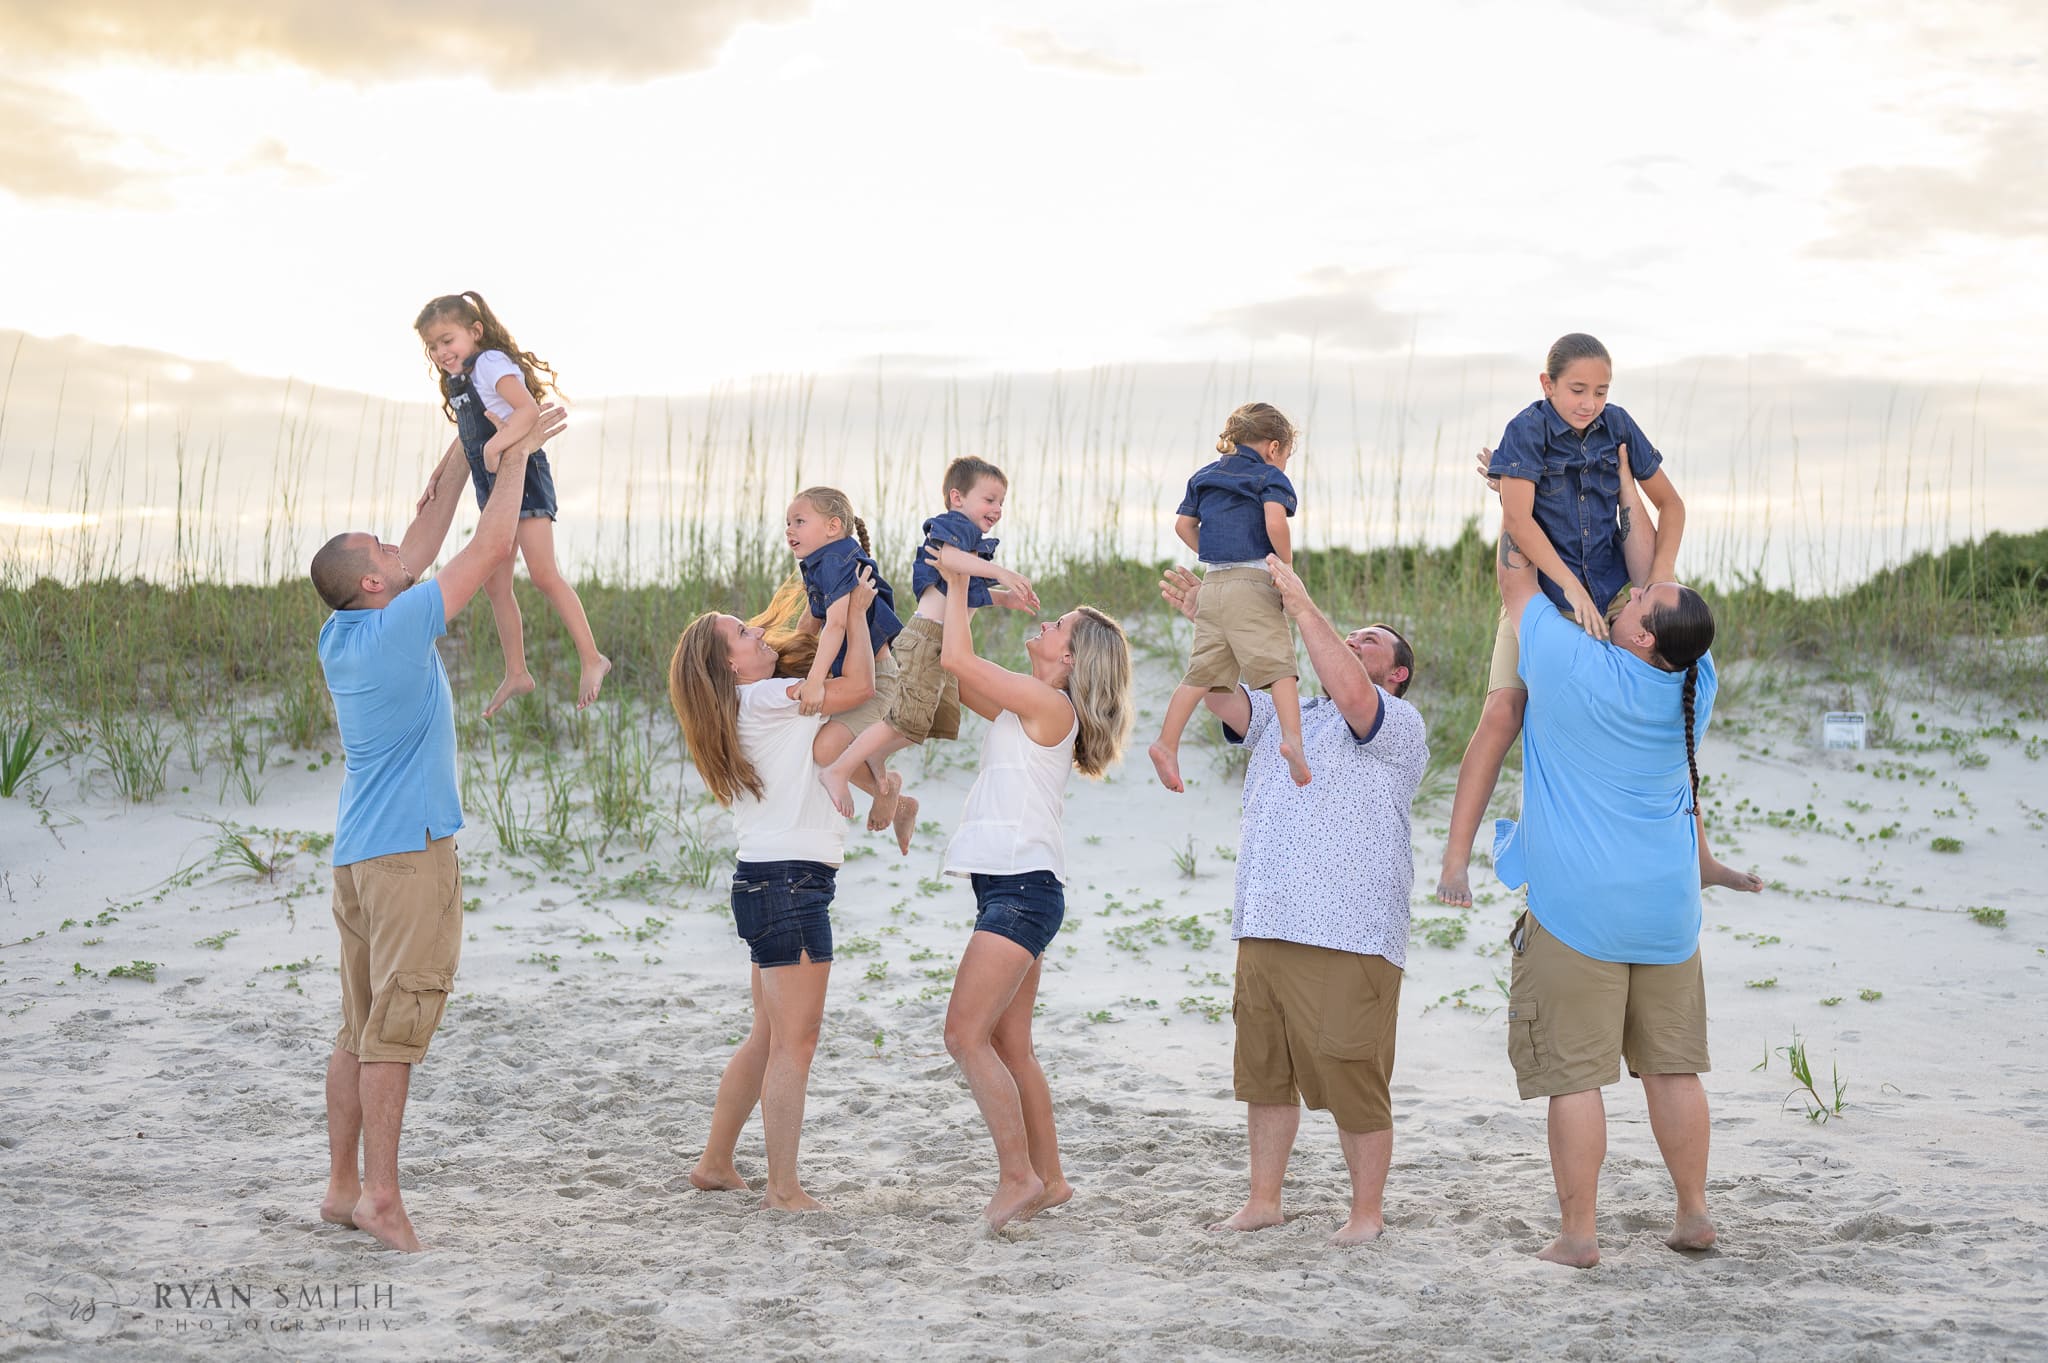 Throwing all the kids in the air at the same time - Huntington Beach State Park